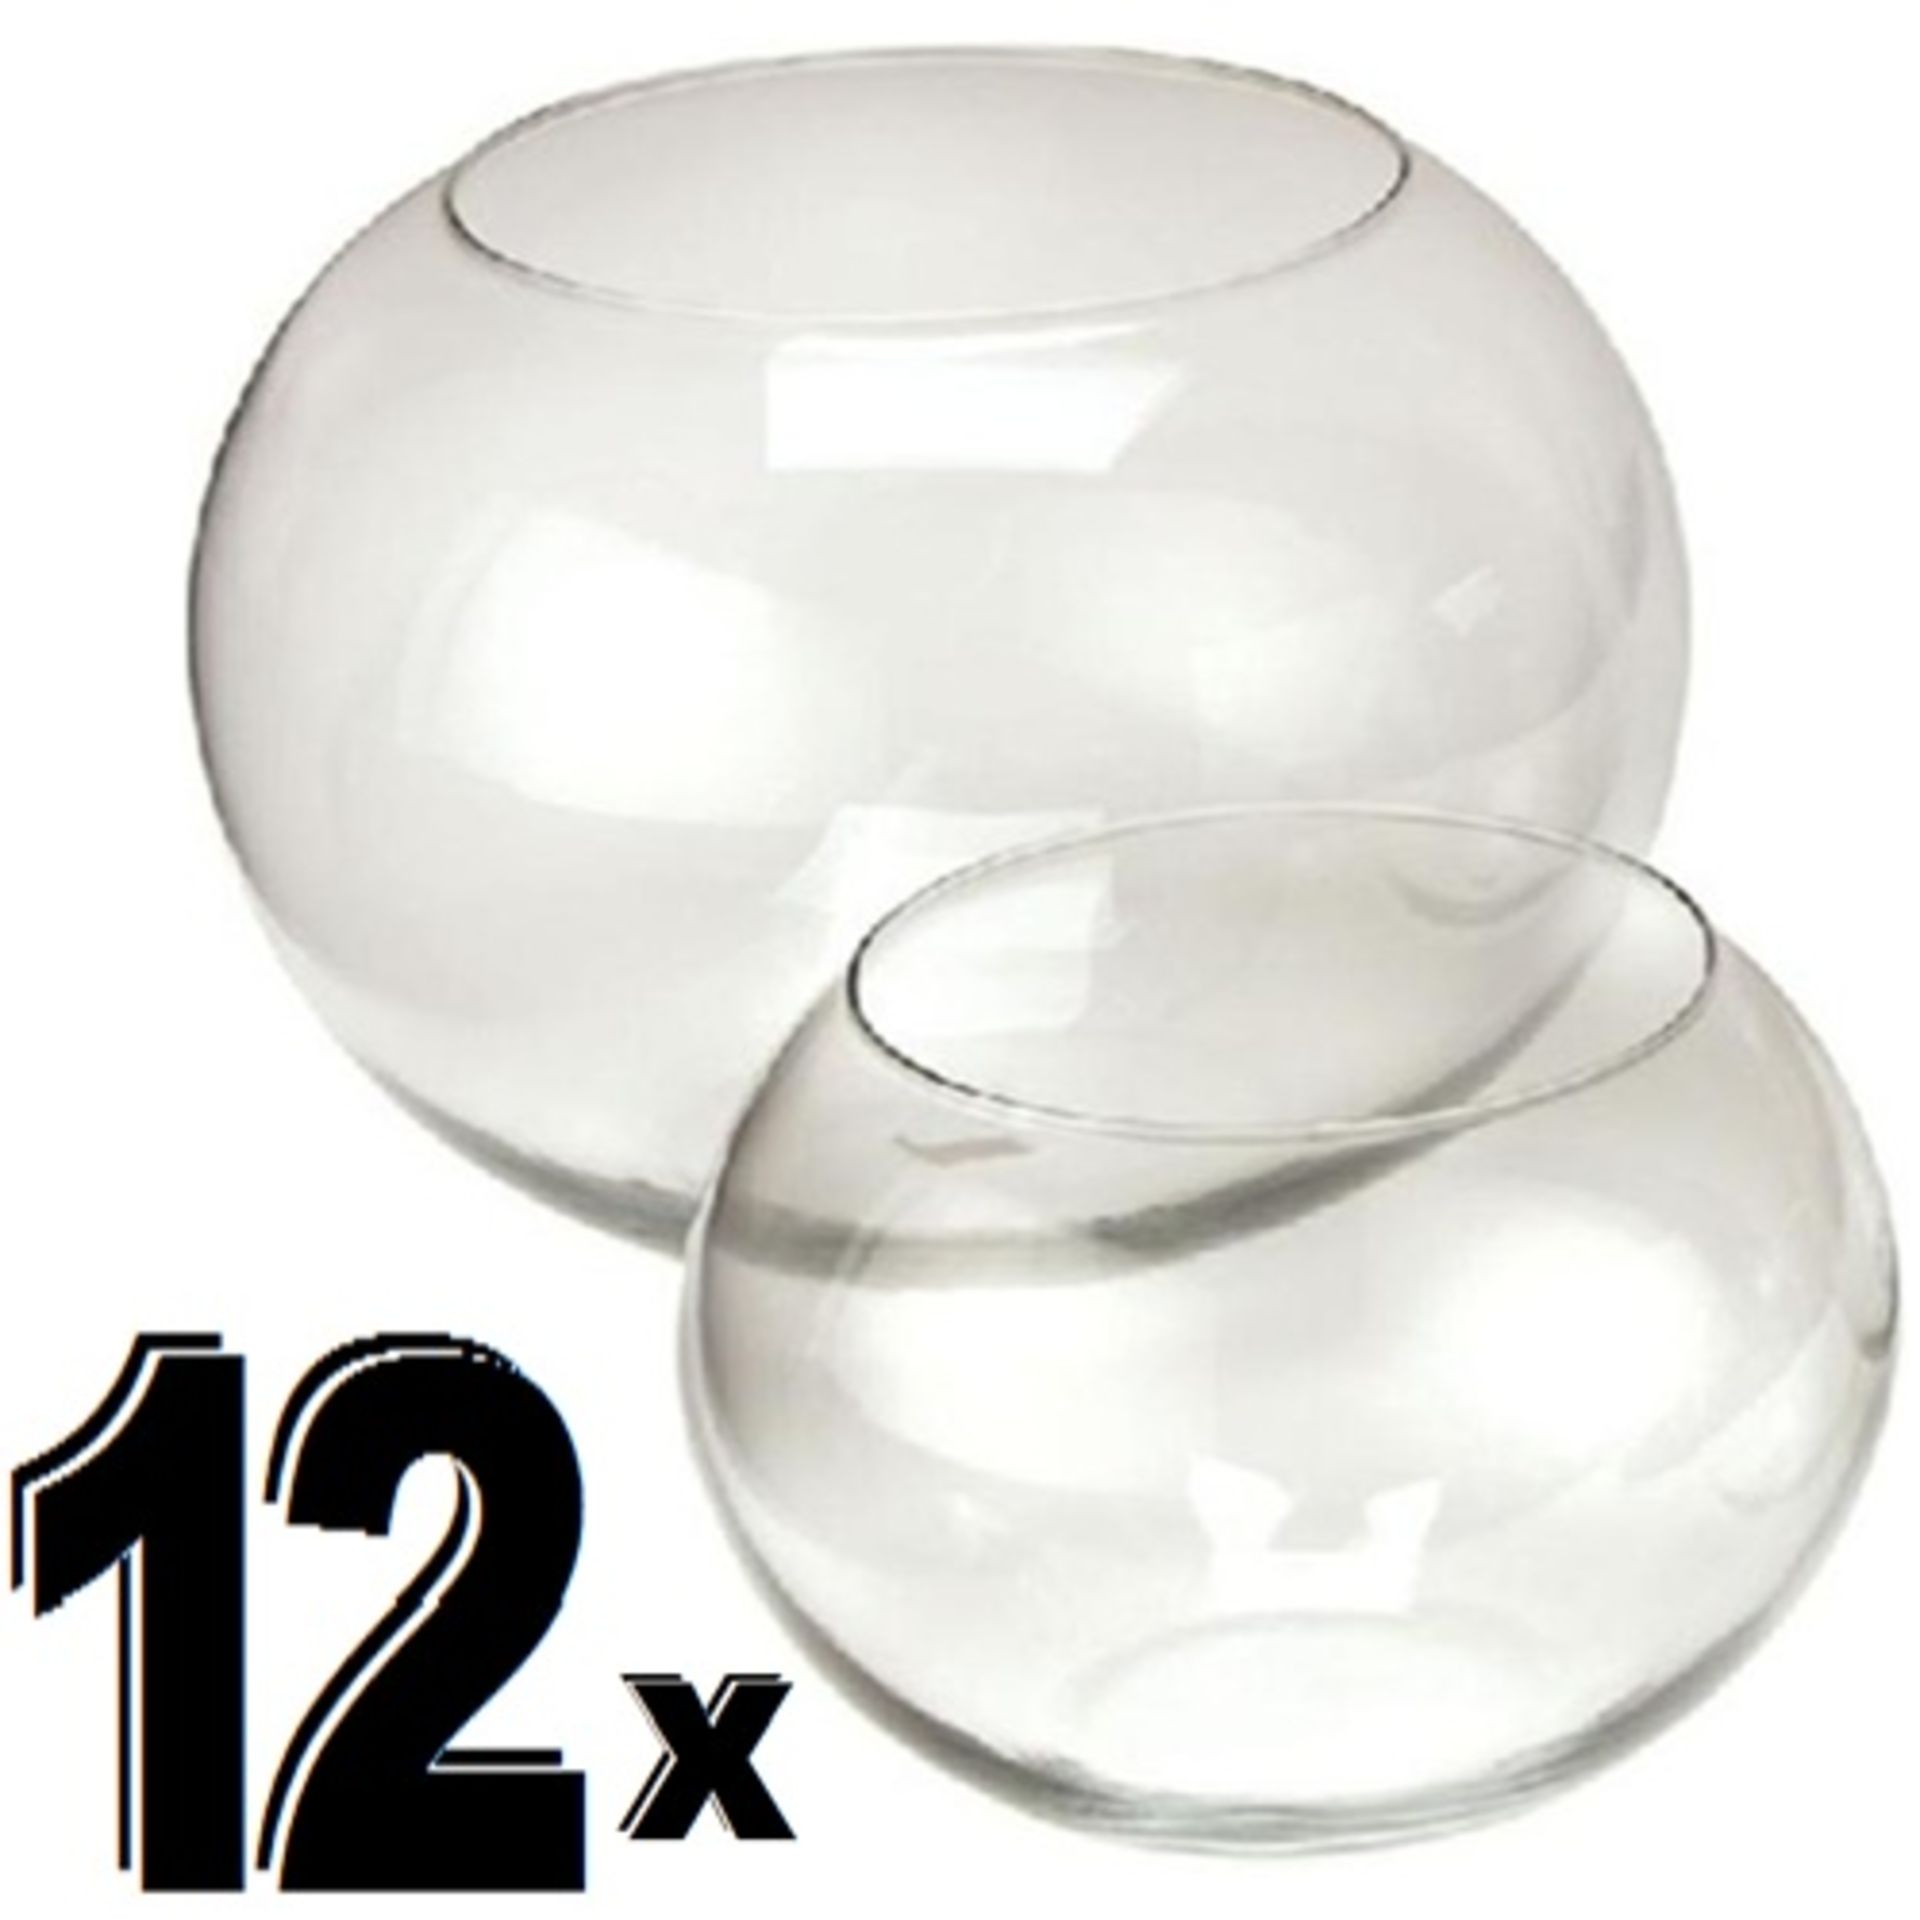 12 x 8" Large Clear Glass Bowls - Table Centerpiece for Wedding Party Anniversary Birthday